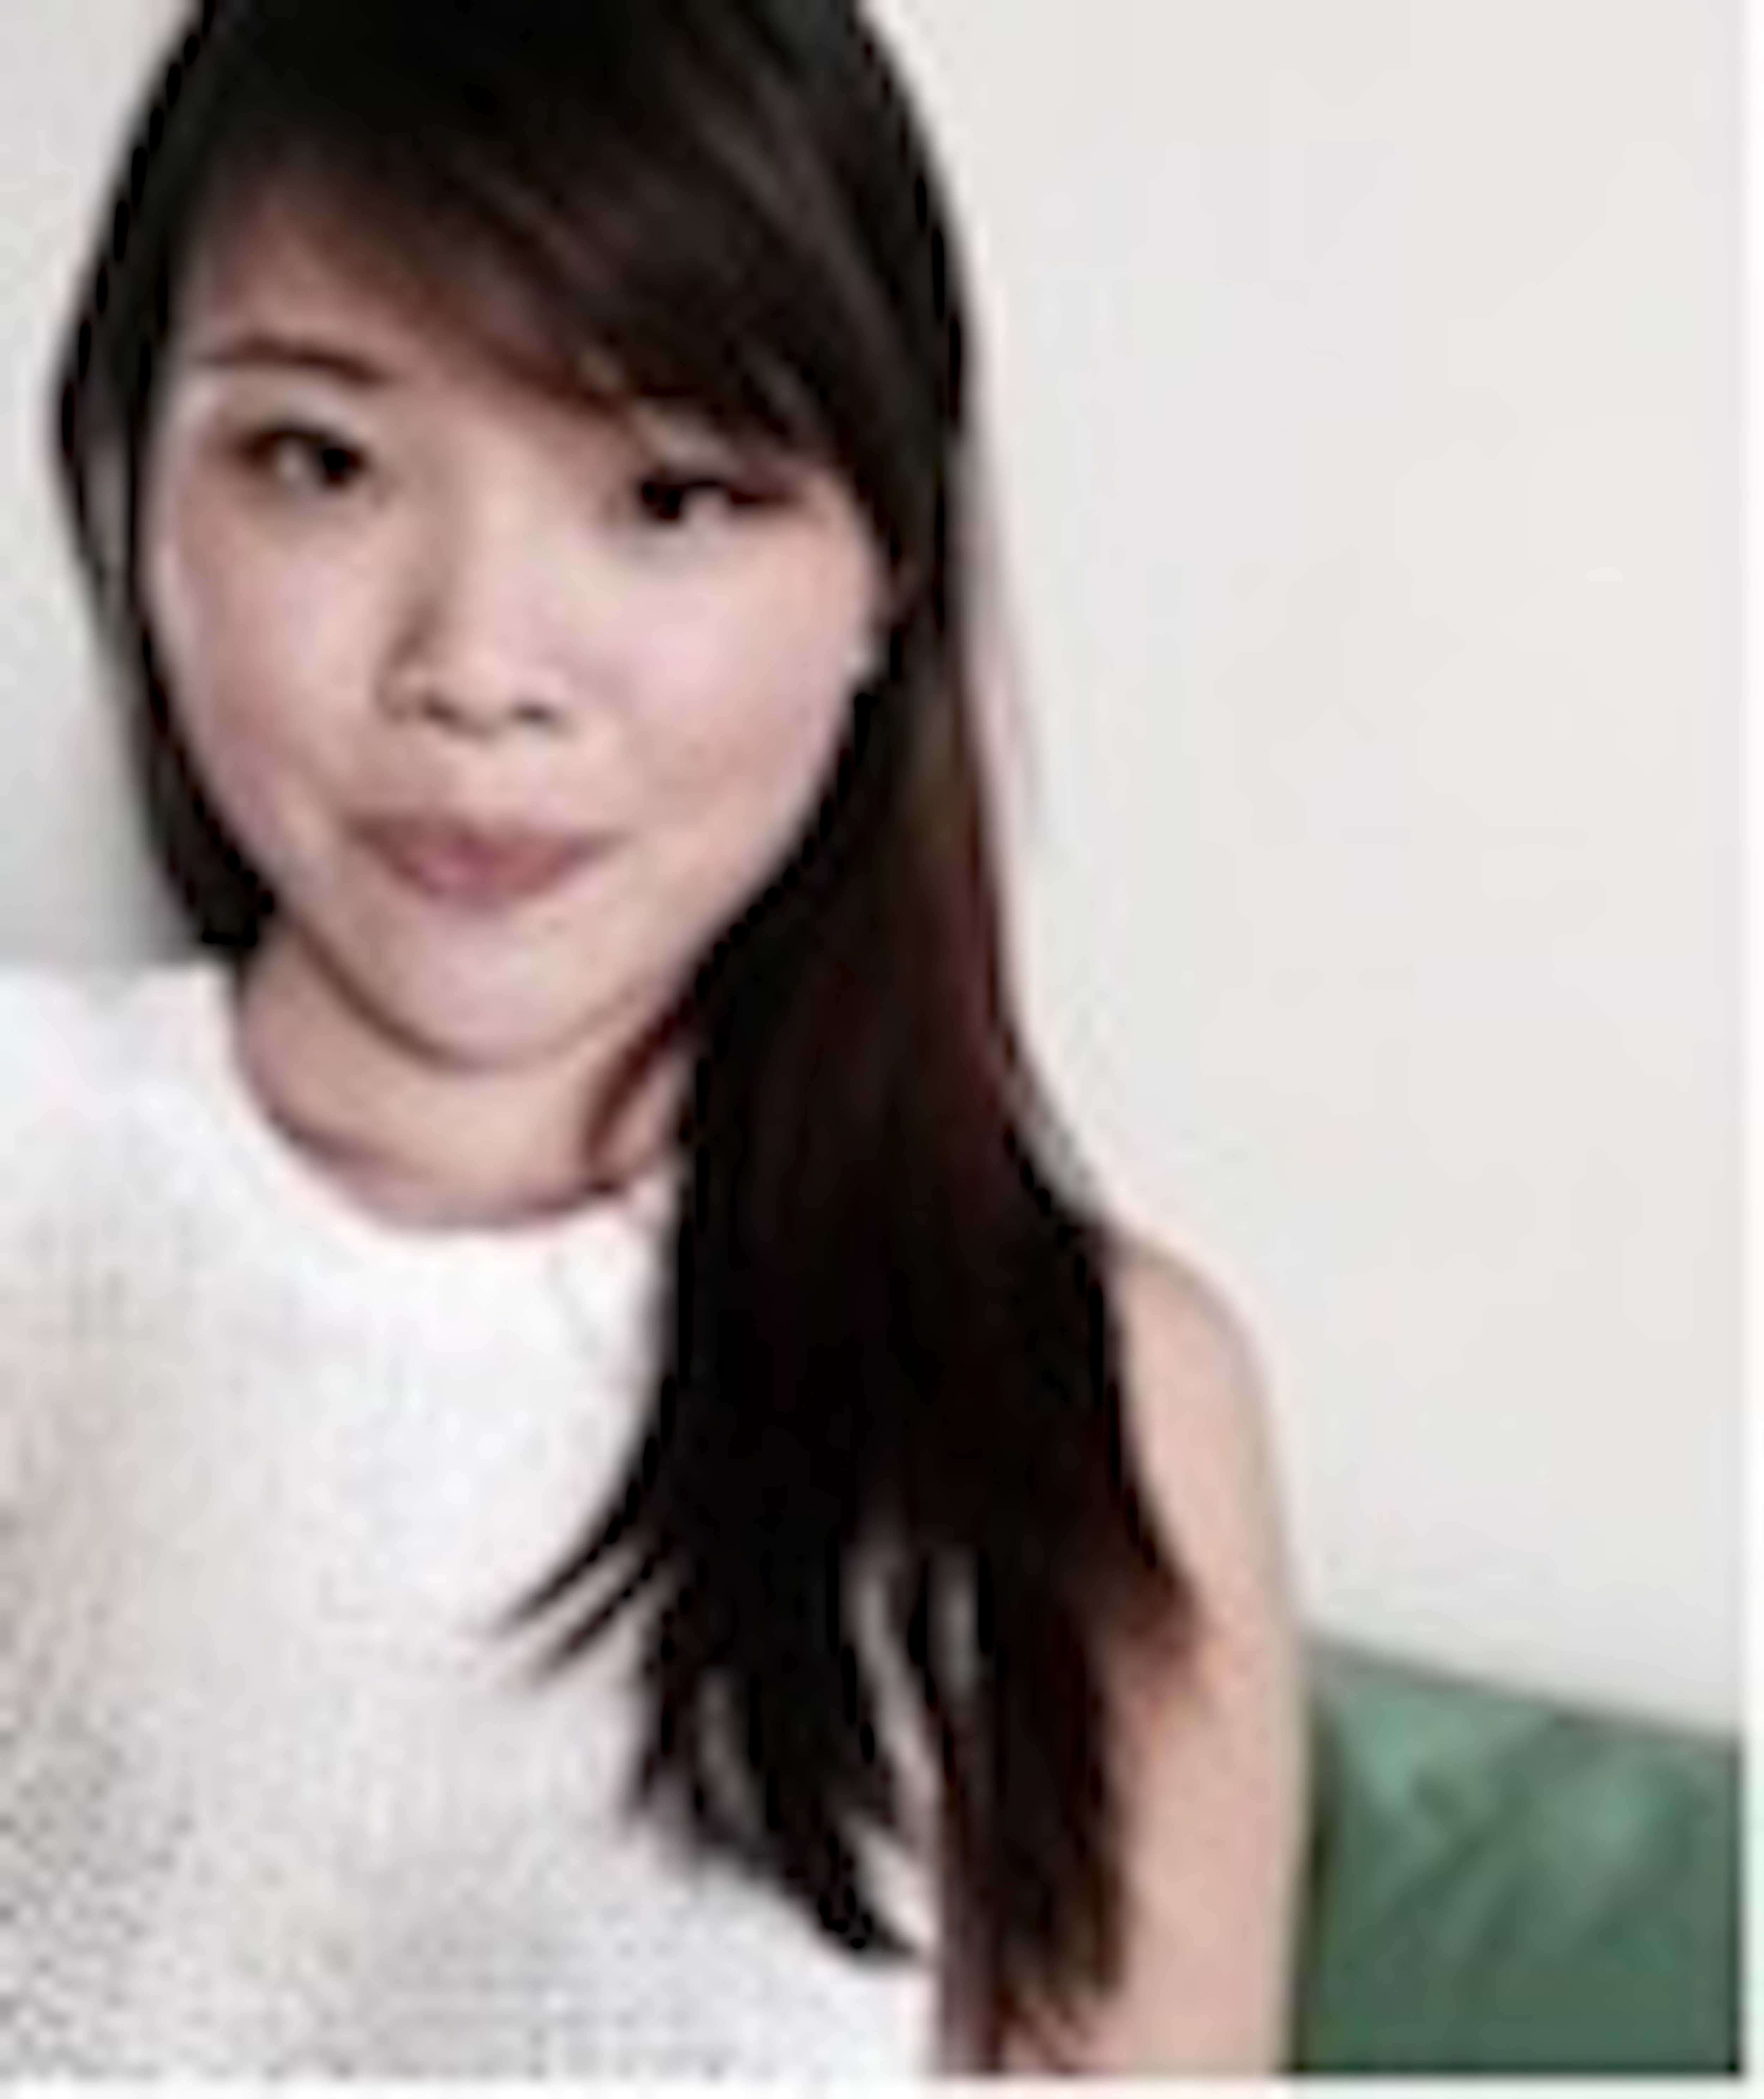 Singapore dating chat room